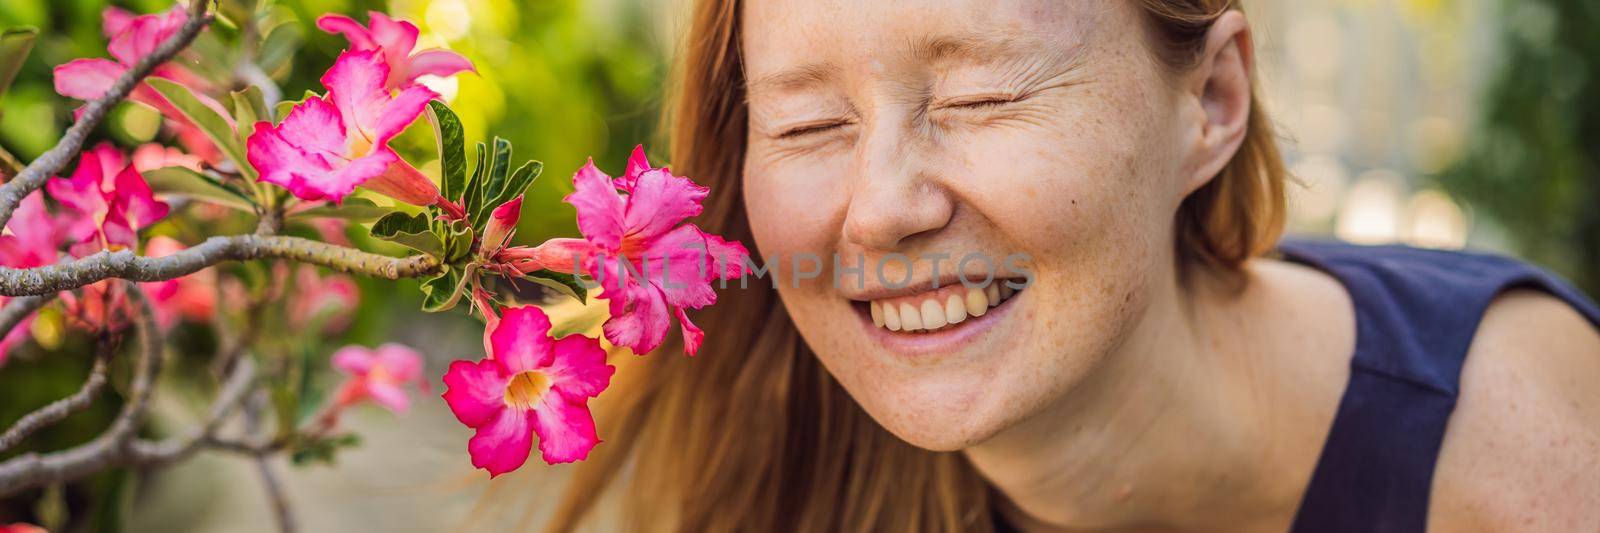 I love my skin. A young woman with freckles, moles, scars and facial wrinkles loves her skin, enjoys life and walks in a beautiful park. BANNER, LONG FORMAT